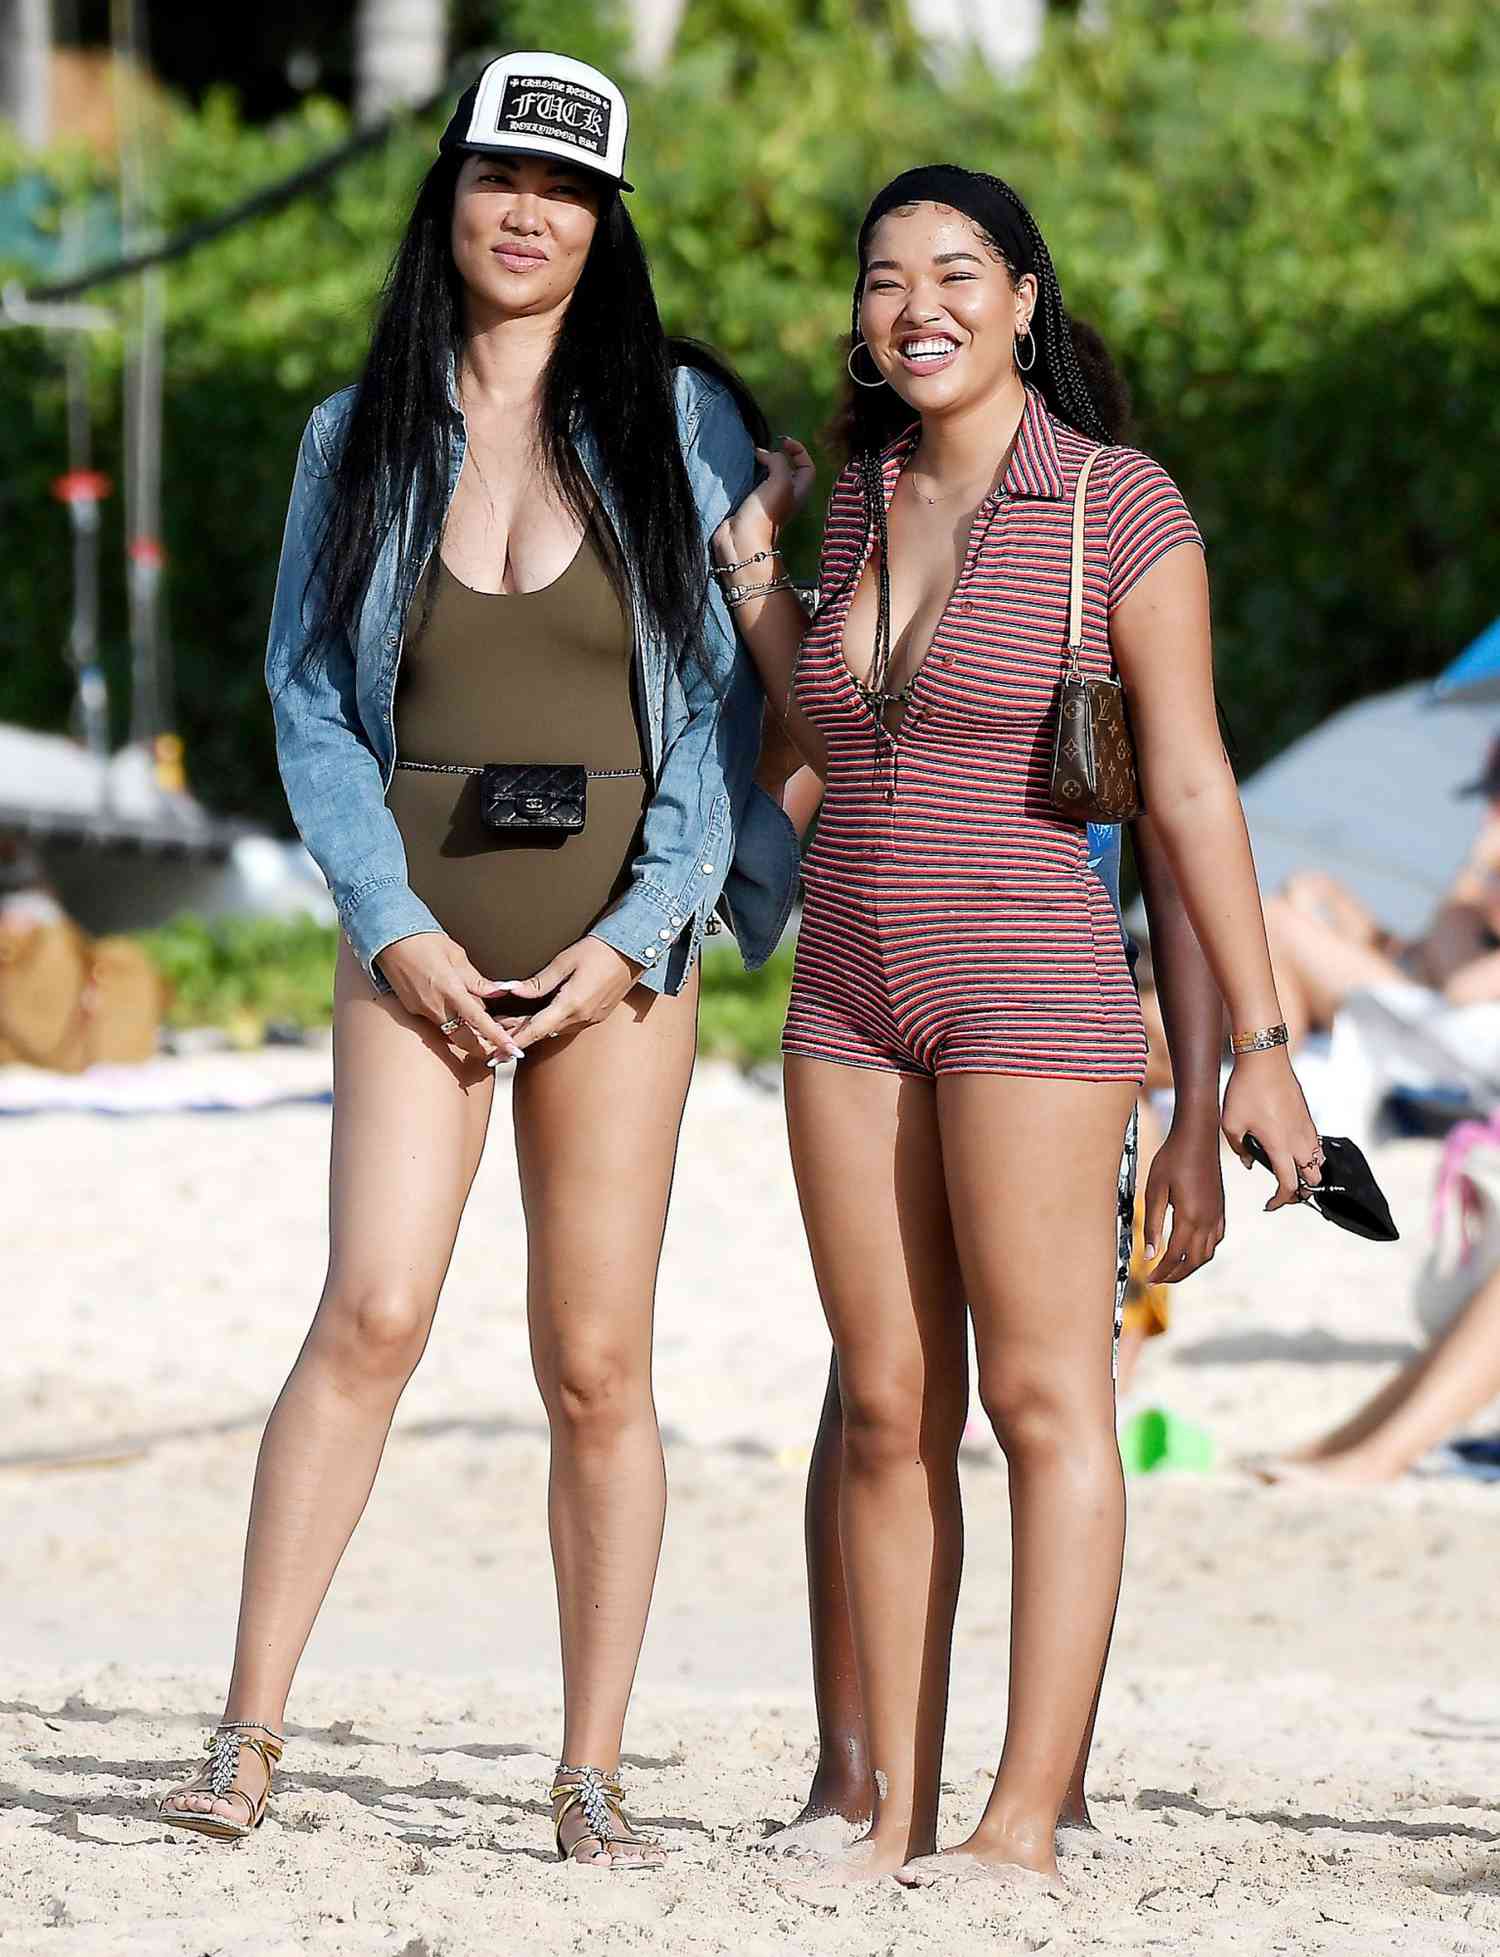 Kimora Lee Simmons And Daughter Ming Lee Simmons Seen Enjoying The Carribean Sun In St Barths